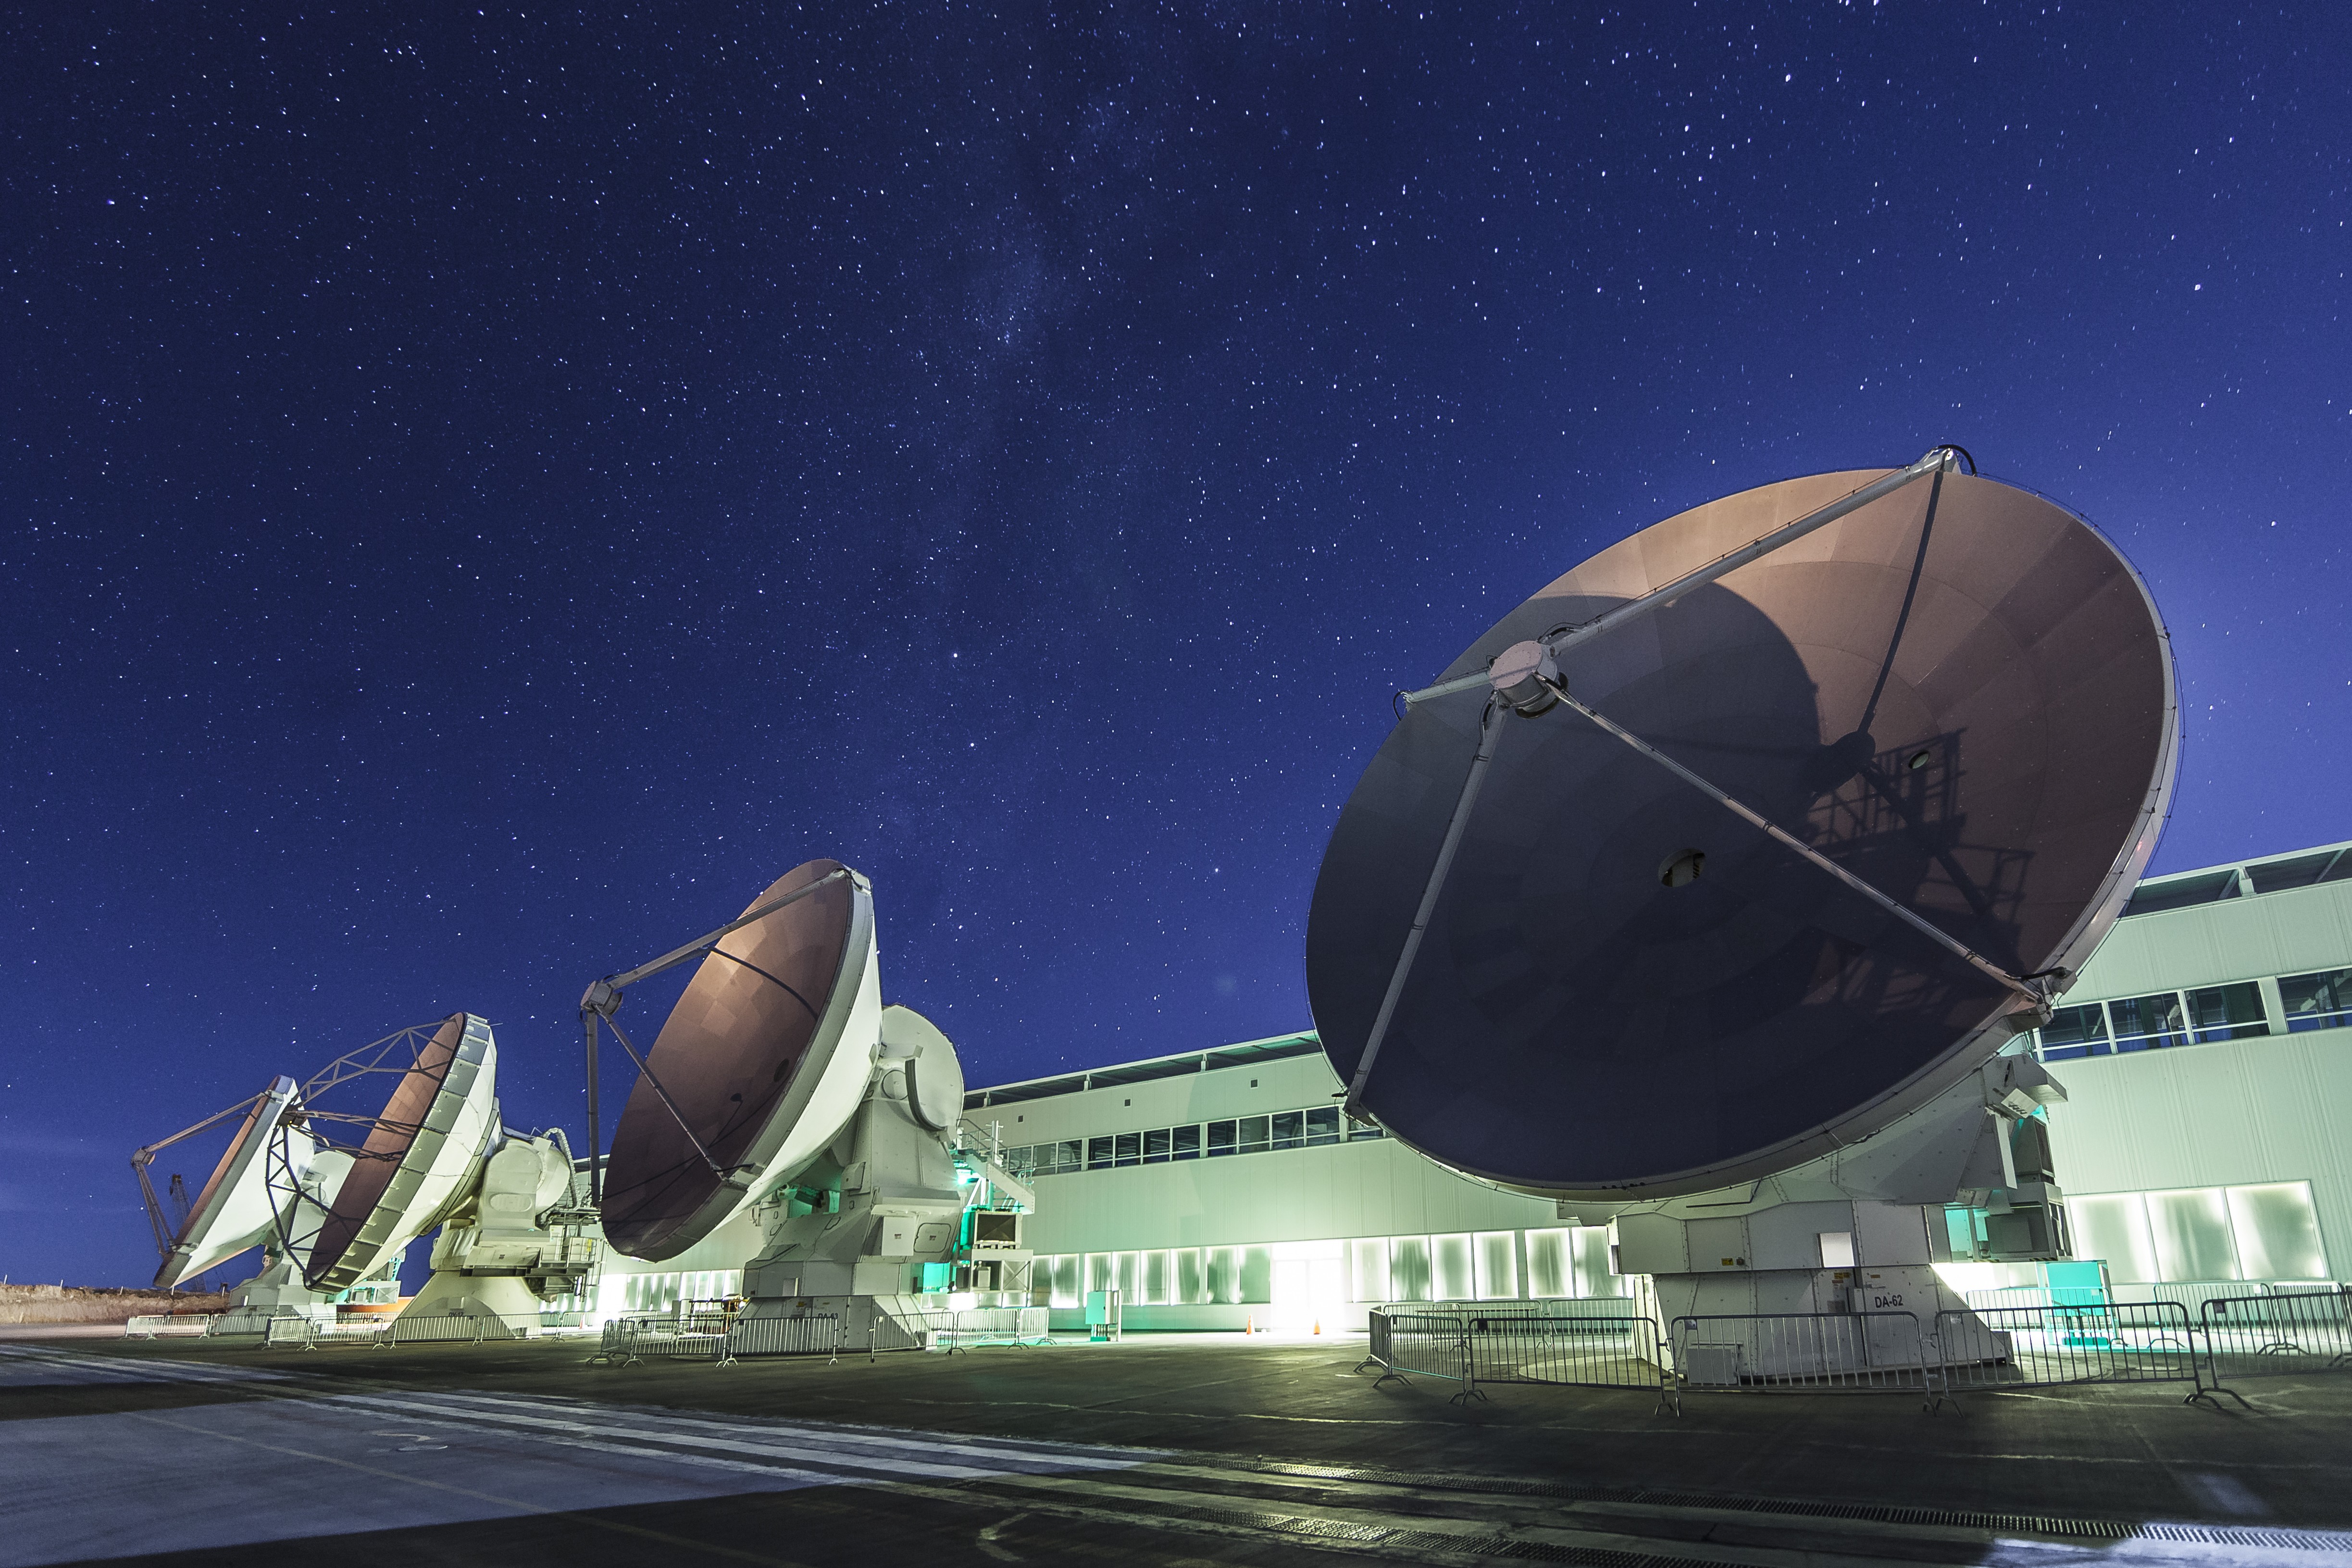 [UNVERIFIED CONTENT] Operations Support Facility, Radioastronomical observatory, Chile, 2013. (Foto: Flickr Vision)